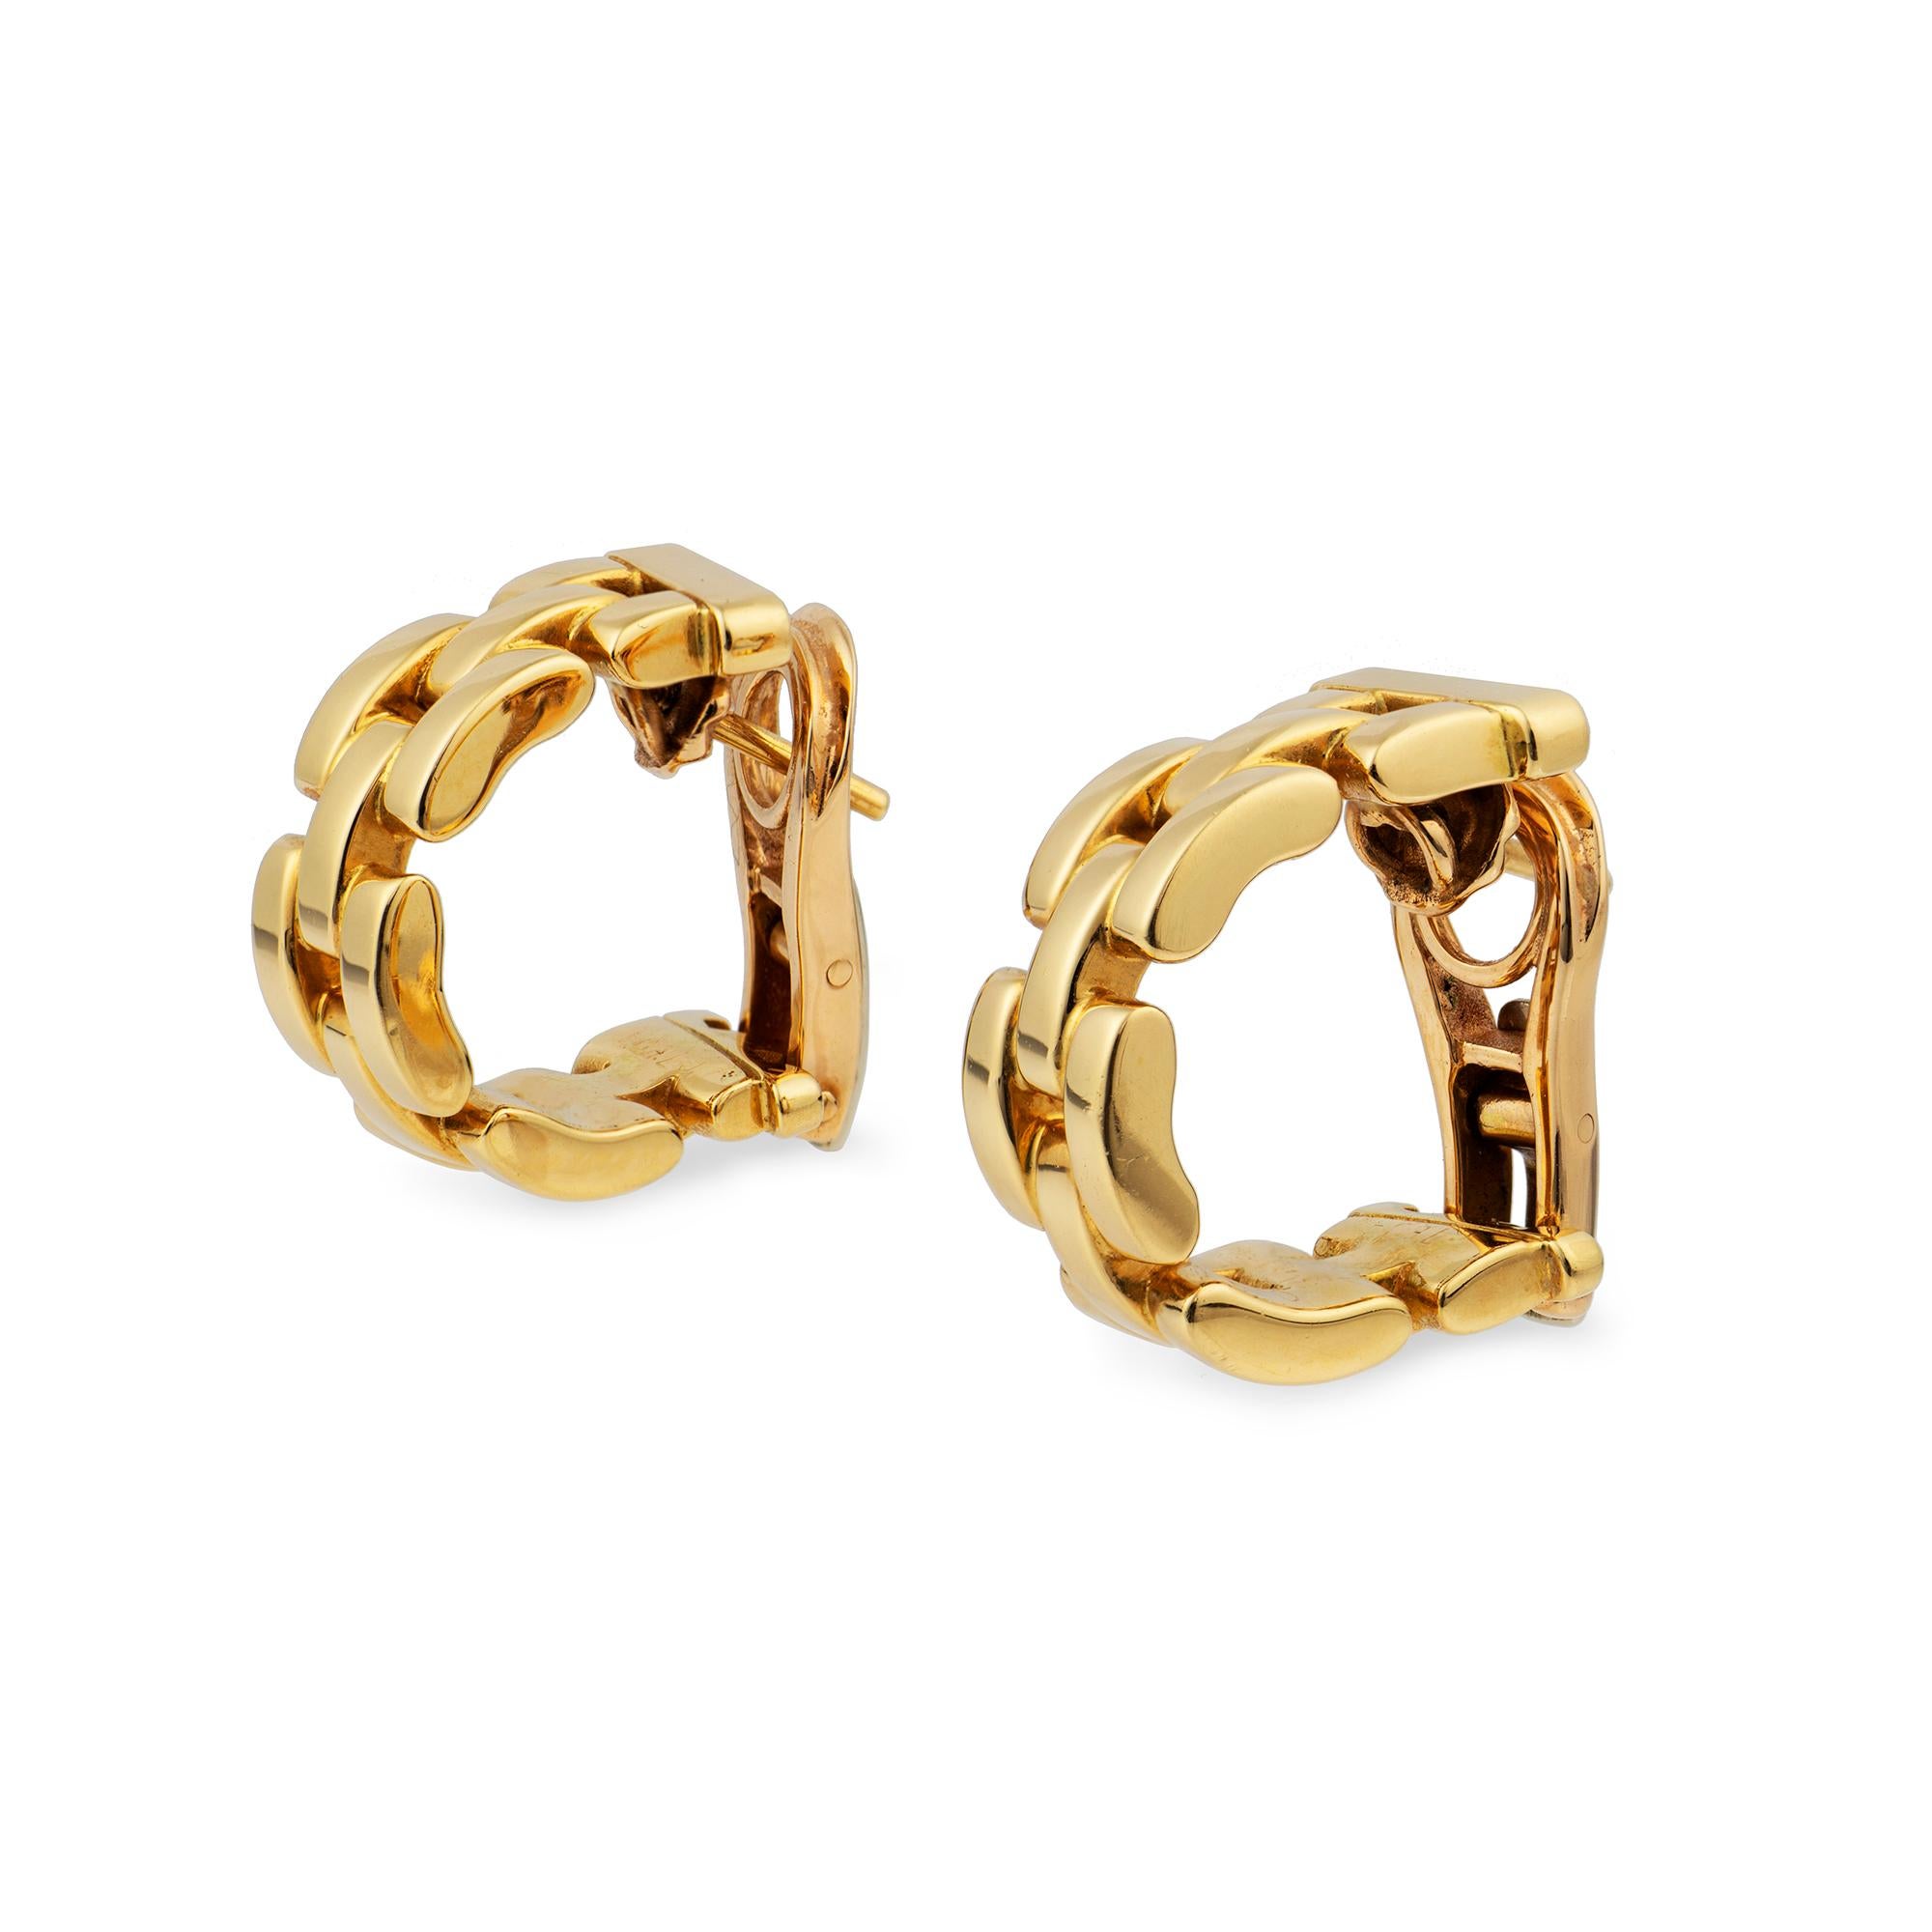 A pair of Cartier Maillon Panthere yellow gold hoop earrings, each is in openwork design,signed Cartier, inscribed C7804 1992, later hallmarked 18ct gold London, bearing the Bentley & Skinner sponsor mark, measuring approximately 1.8x 0.75cm, gross